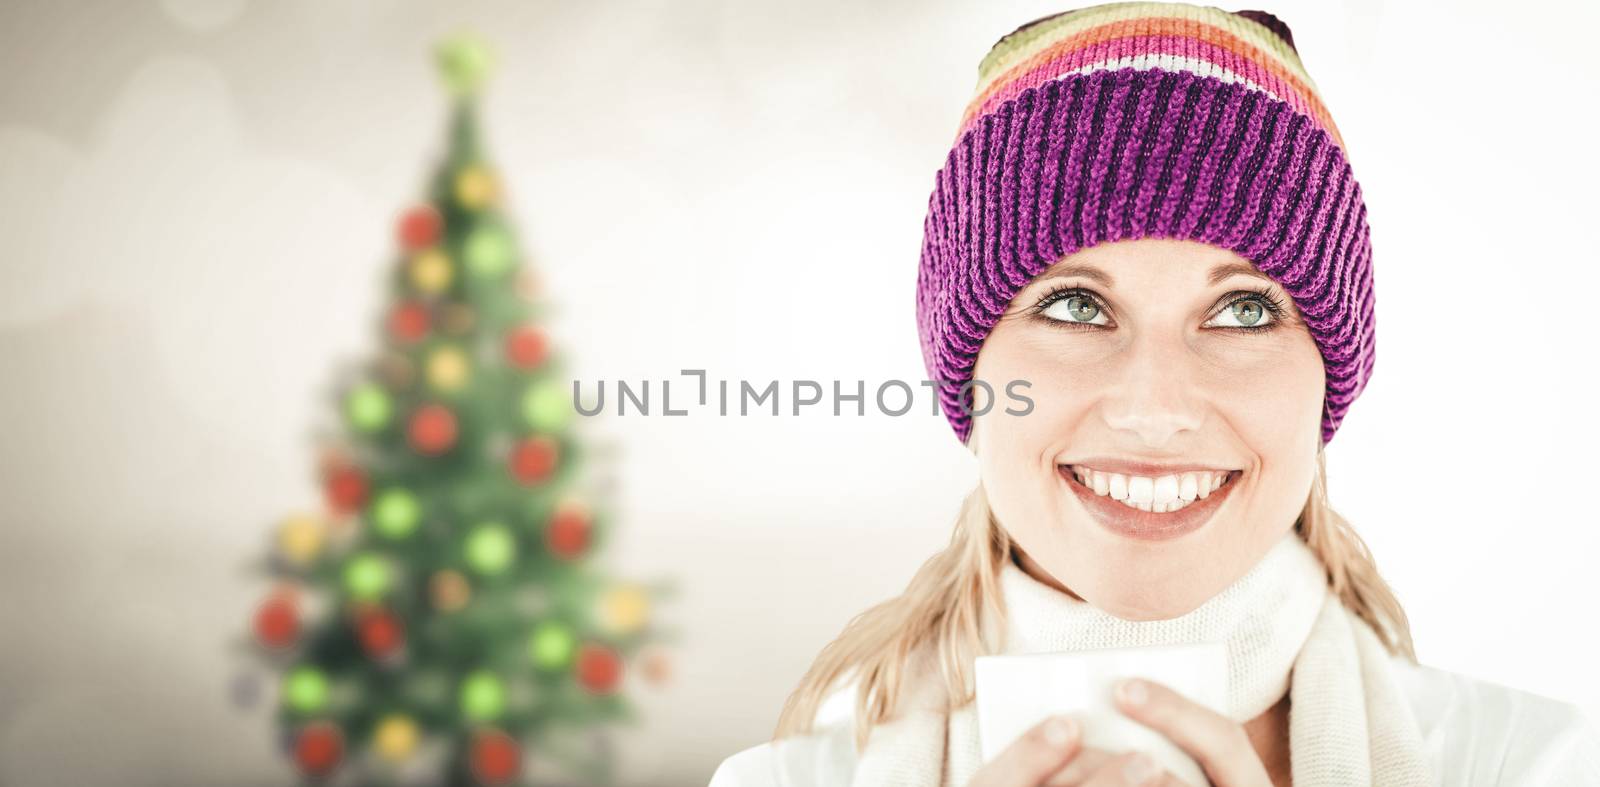 Composite image of smiling woman with a colorful hat and a cup in her hands by Wavebreakmedia